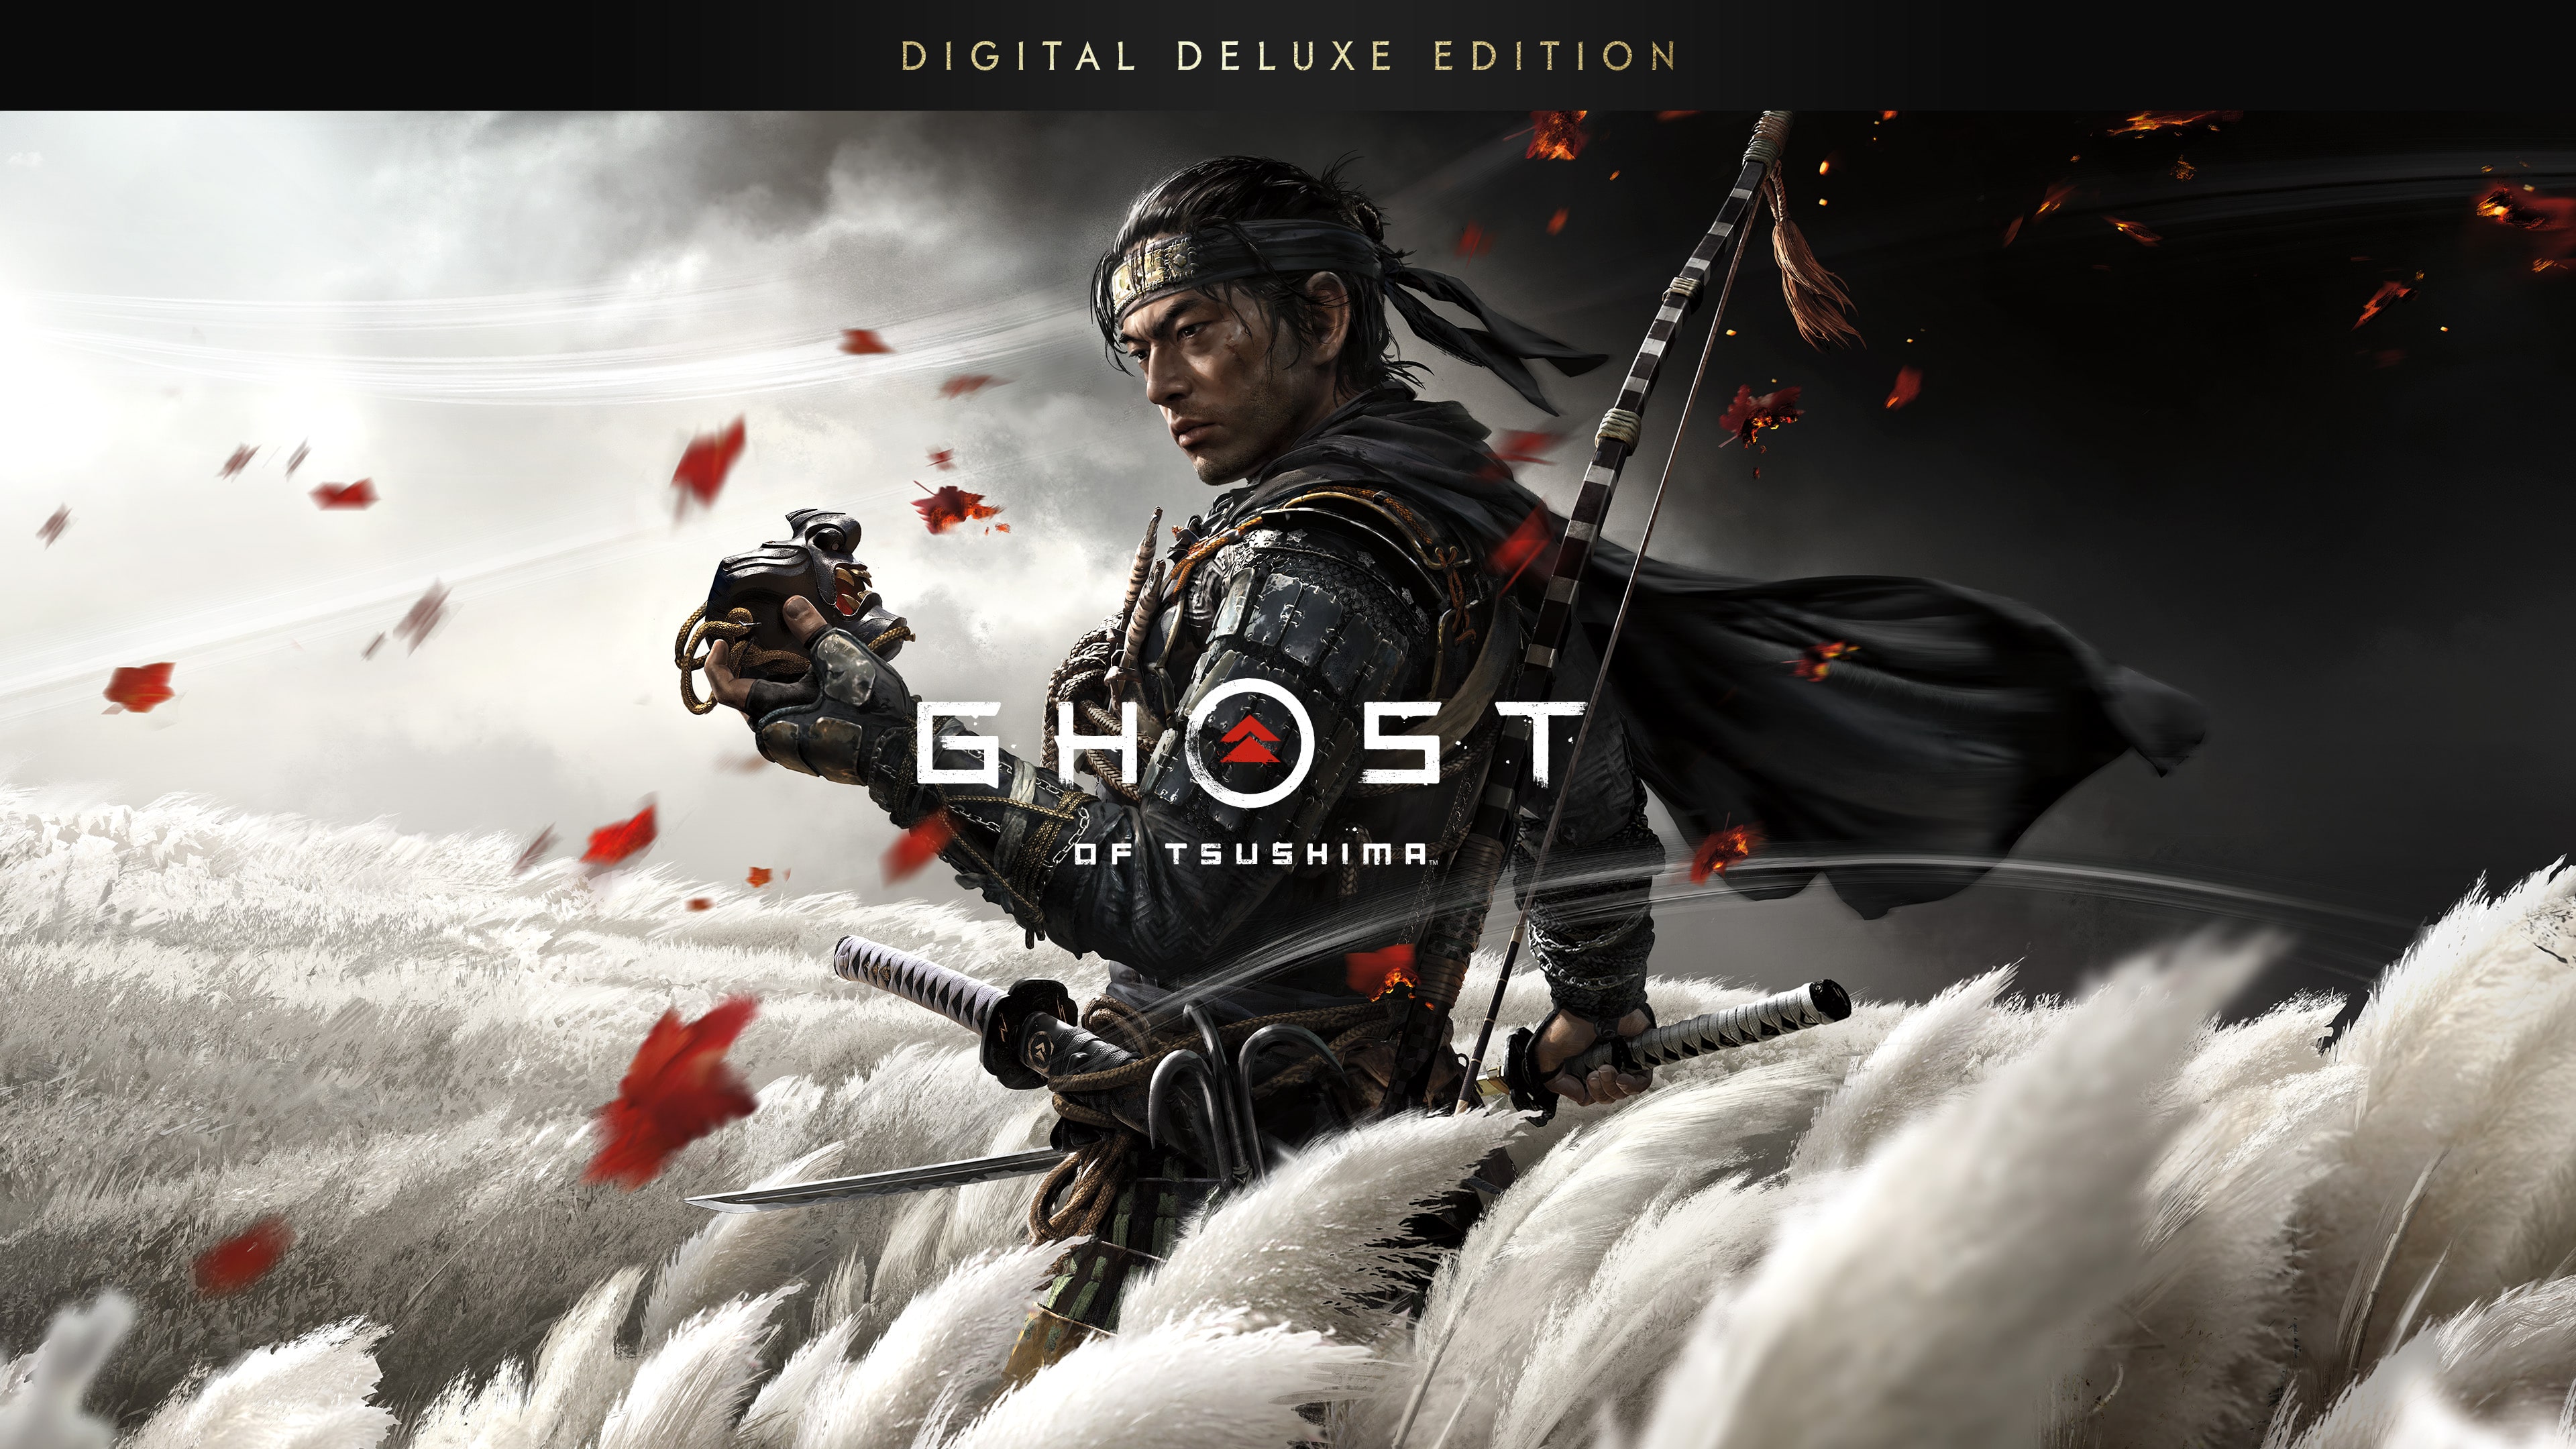 ps4 pro ghost of tsushima edition